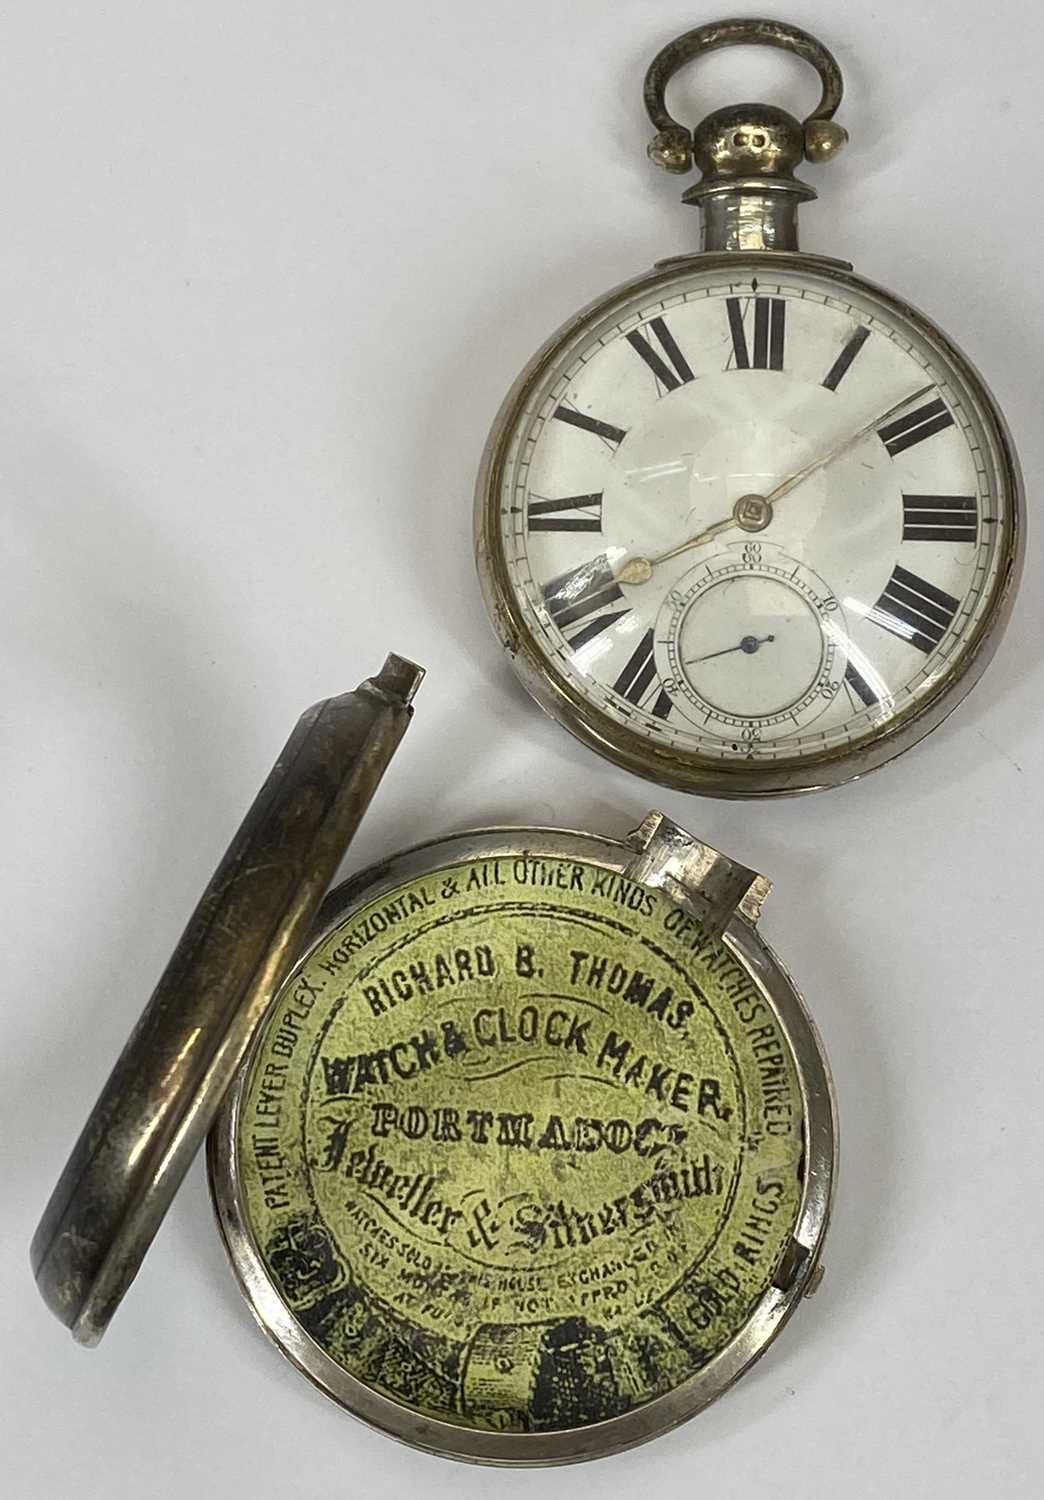 RICHARD B THOMAS, PORTHMADOG, VICTORIAN SILVER PAIR CASED VERGE POCKET WATCH, white enamel dial with - Image 2 of 3